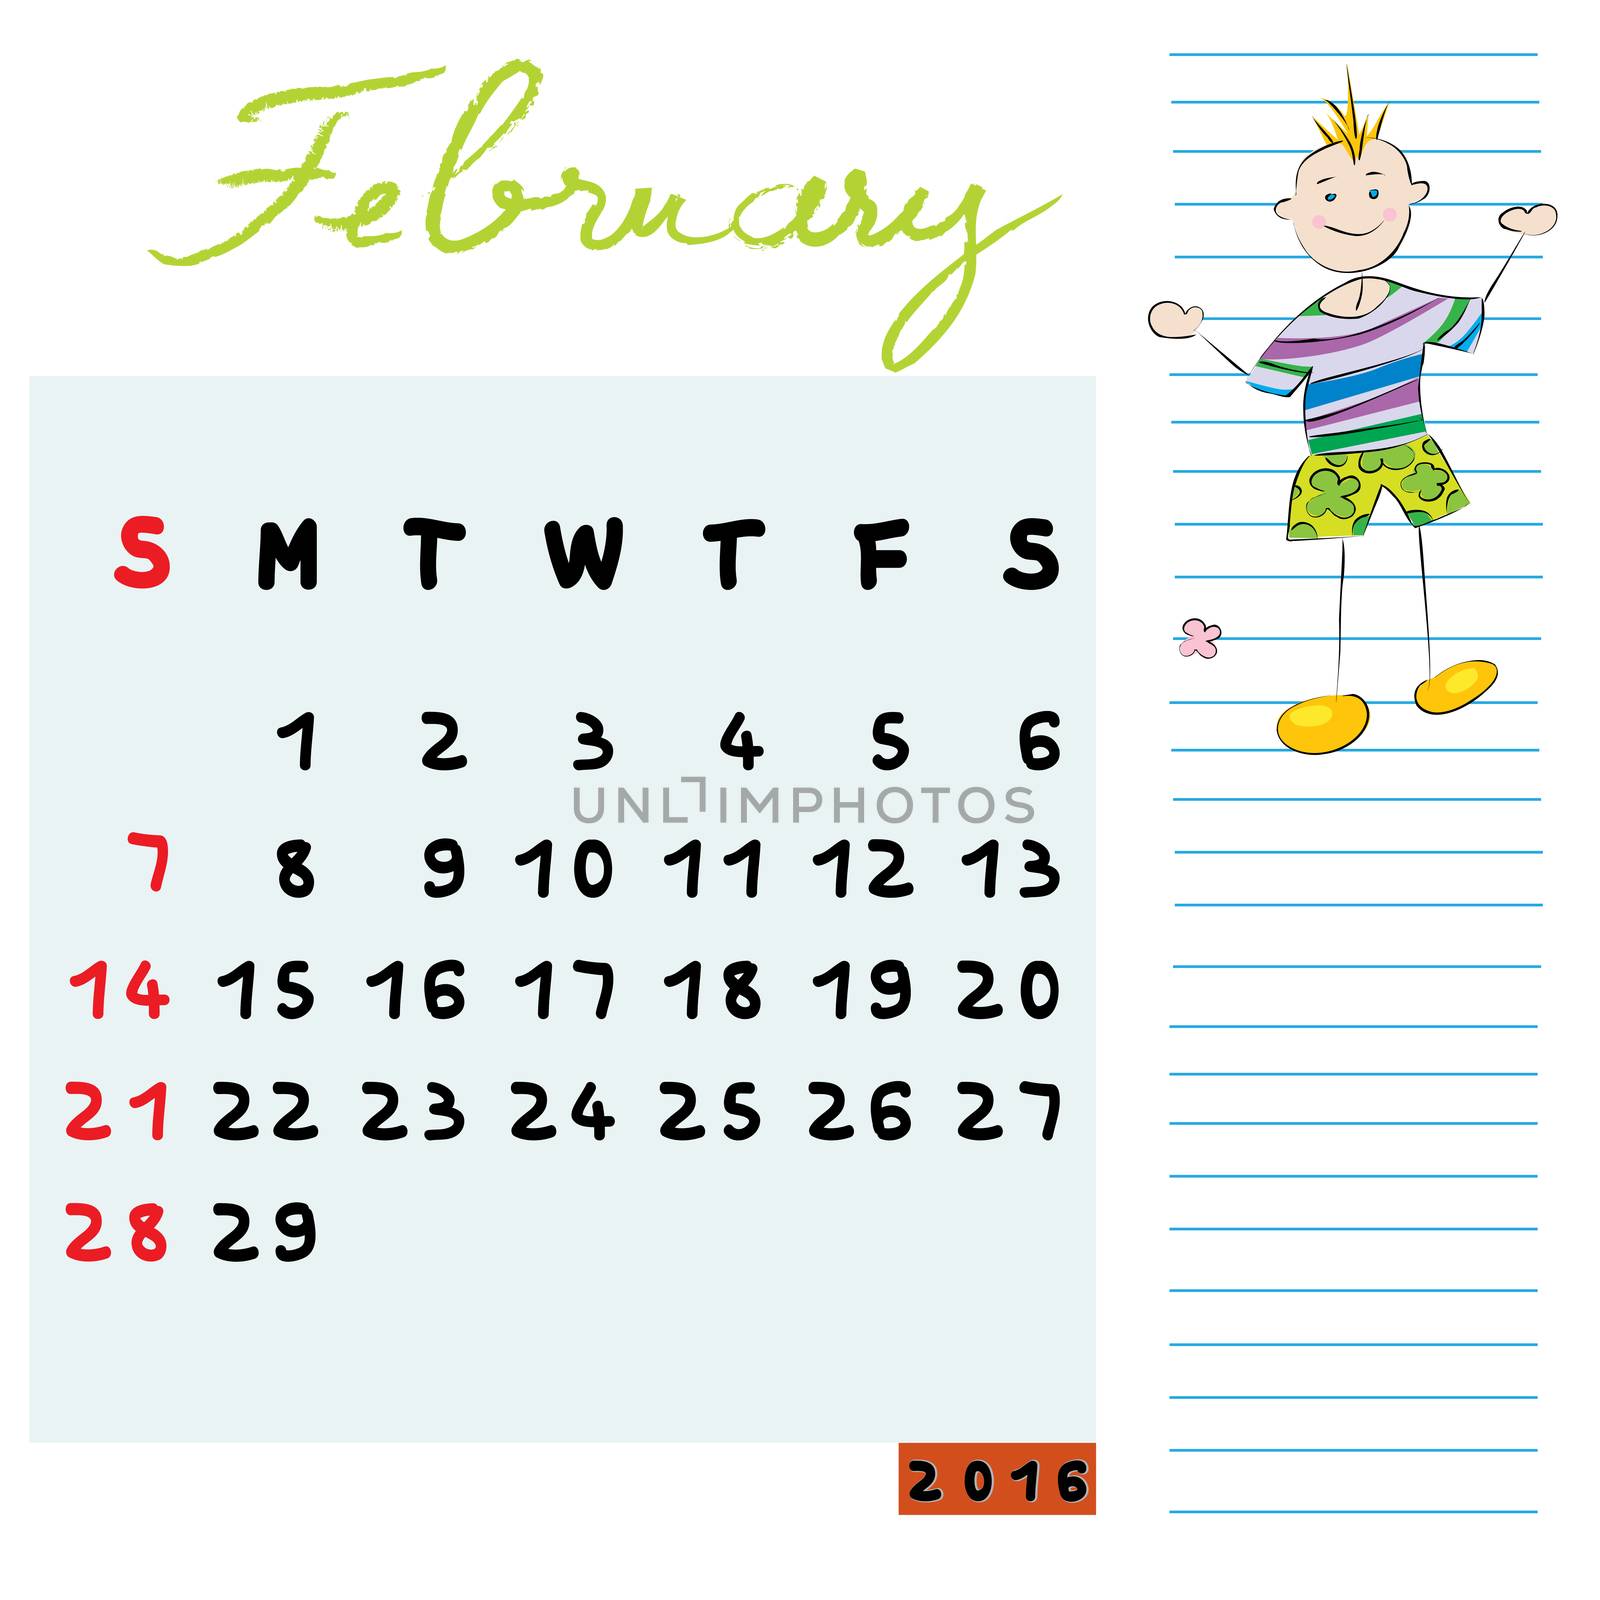 Hand drawn design of February 2016 calendar with kid illustration, the open-minded student profile for international schools